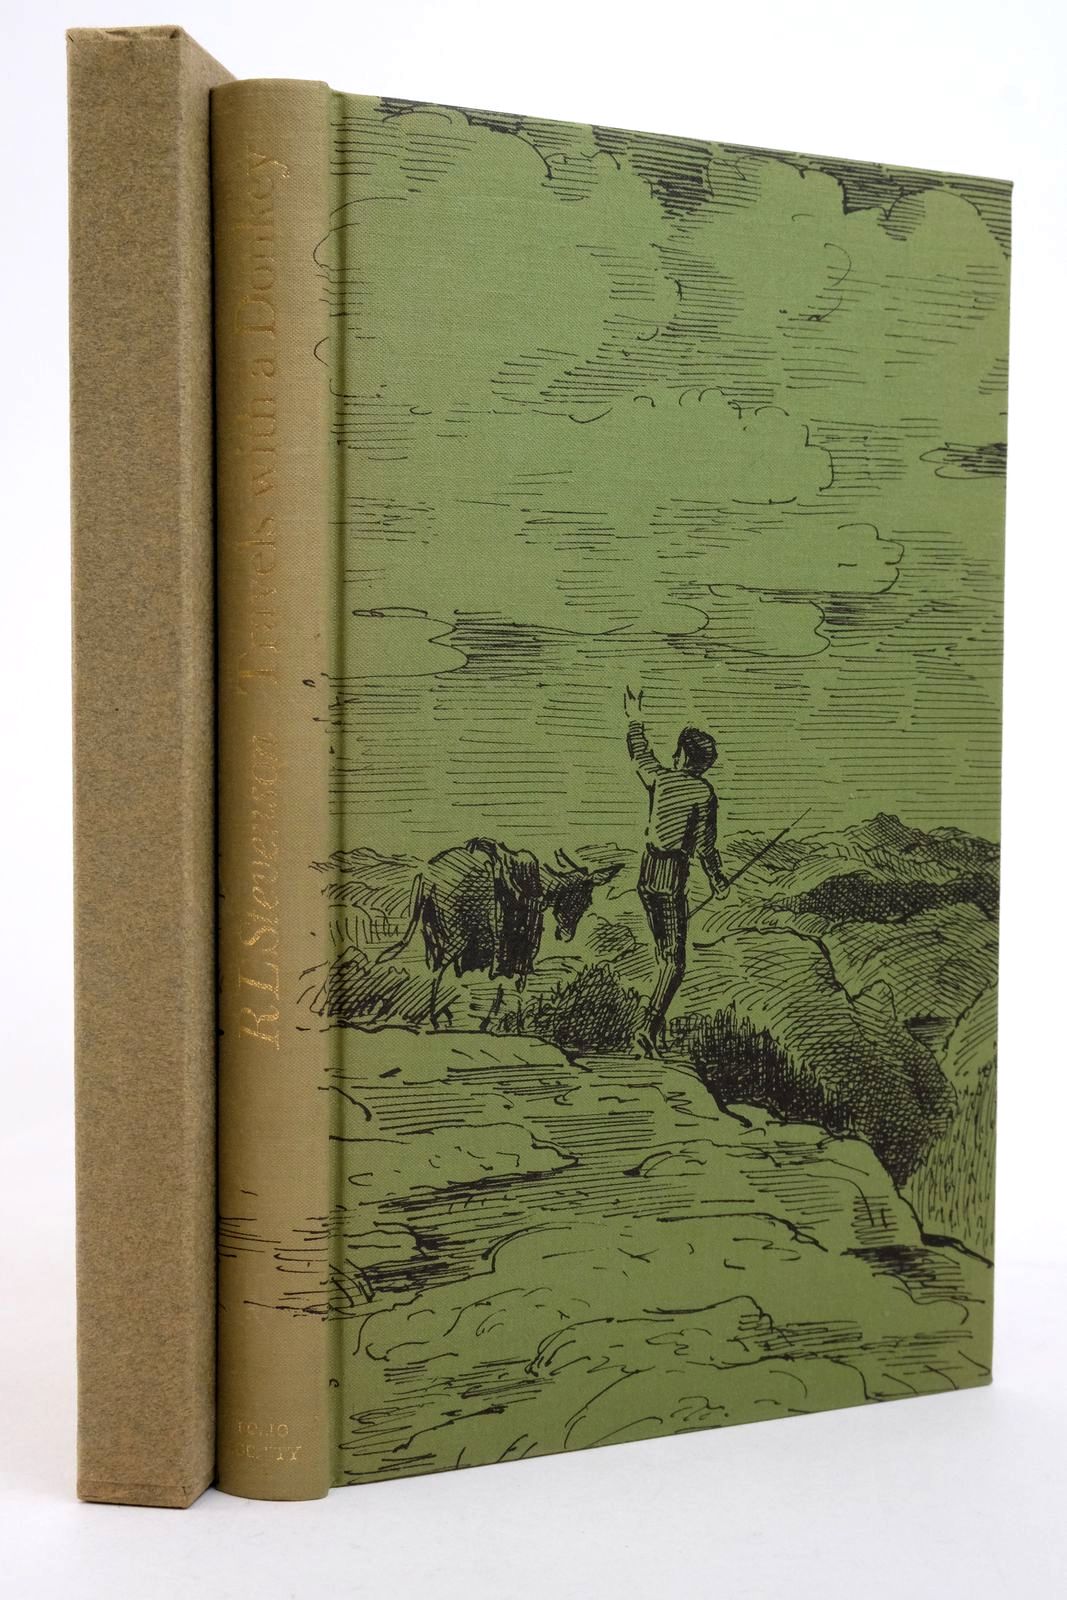 Photo of TRAVELS WITH A DONKEY IN THE CEVENNES written by Stevenson, Robert Louis illustrated by Ardizzone, Edward published by Folio Society (STOCK CODE: 2138288)  for sale by Stella & Rose's Books